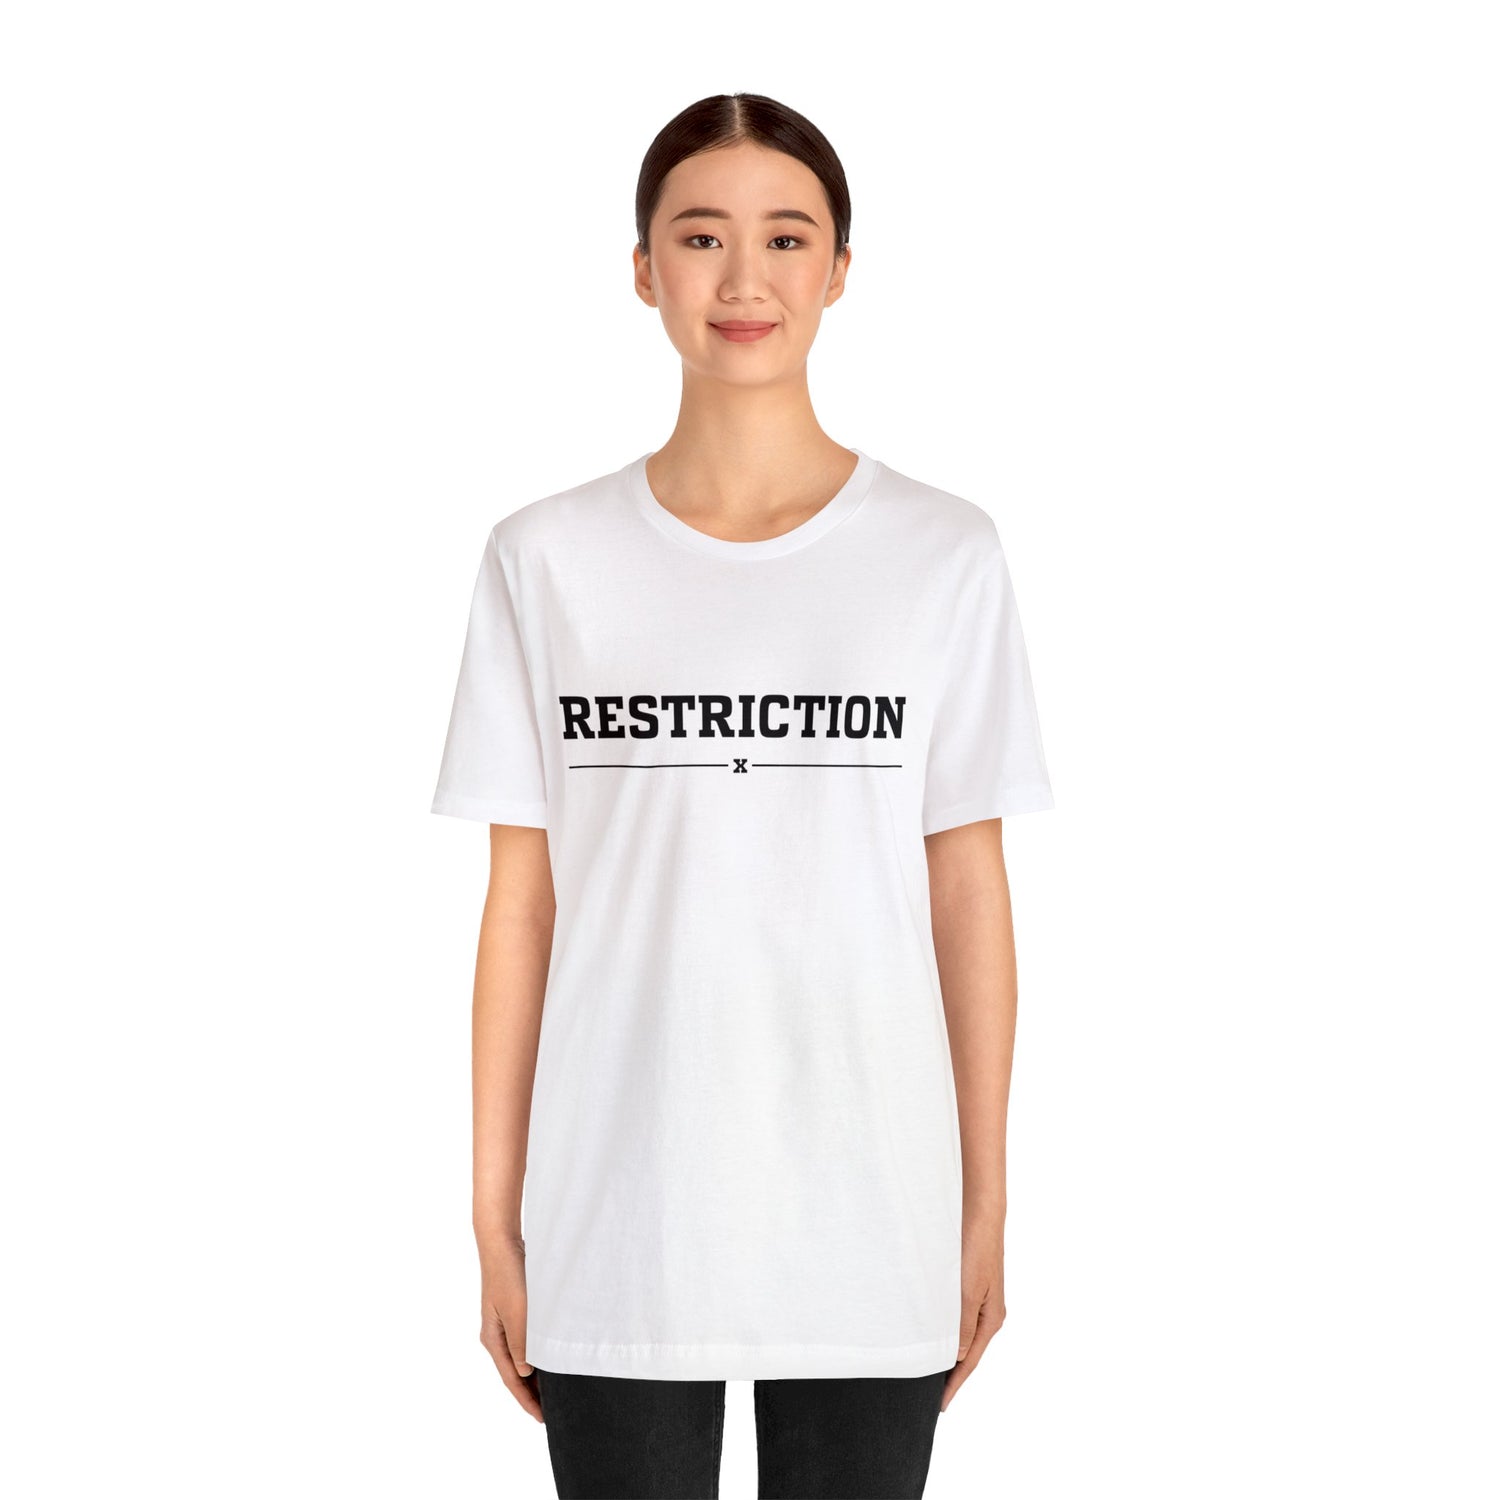 Restriction Tee